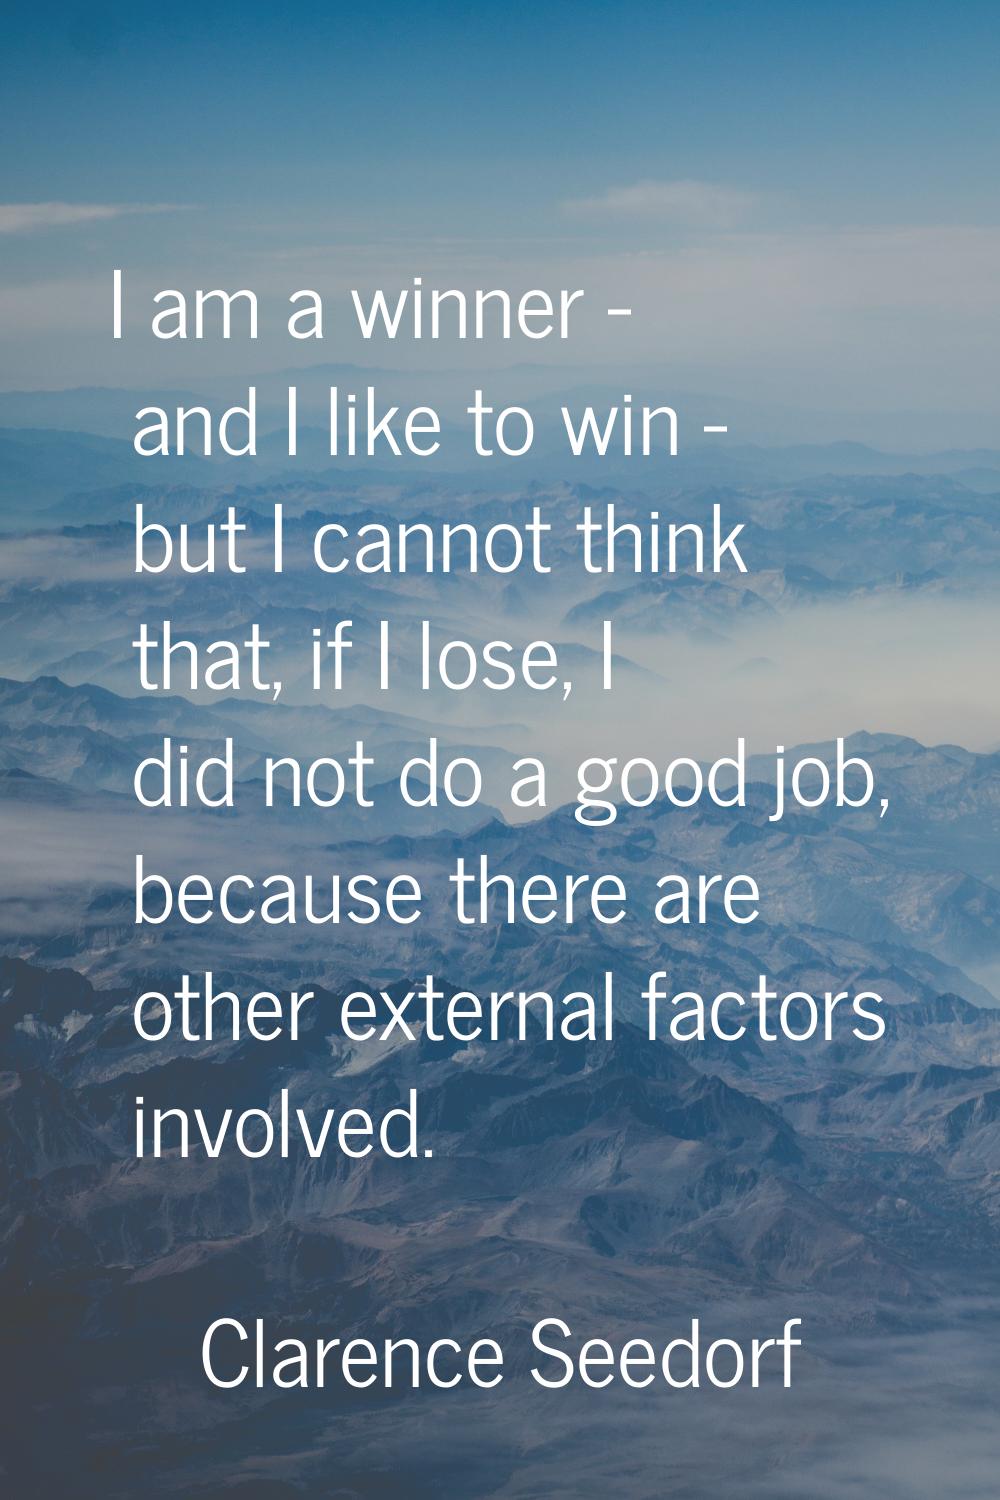 I am a winner - and I like to win - but I cannot think that, if I lose, I did not do a good job, be